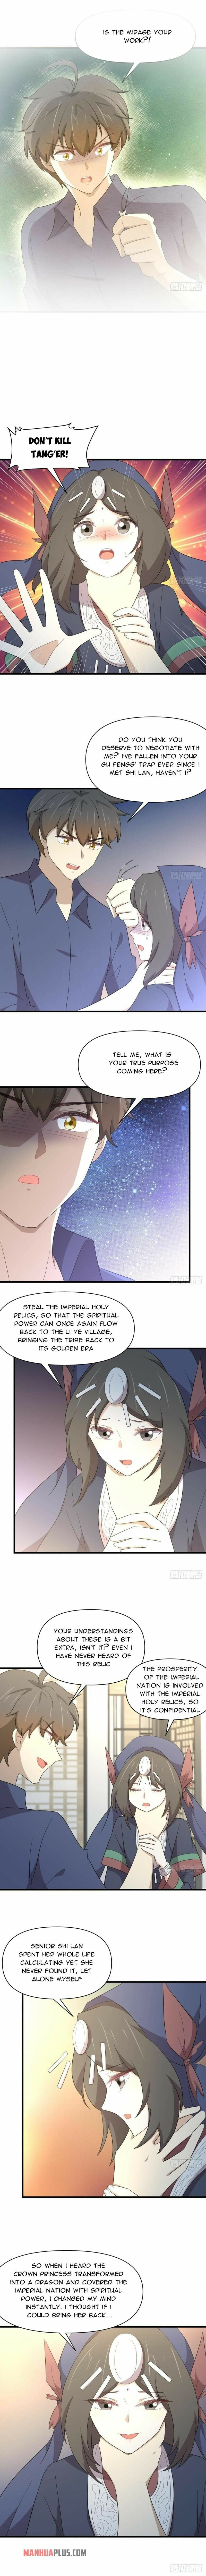 Immortal Swordsman In The Reverse World - Page 2